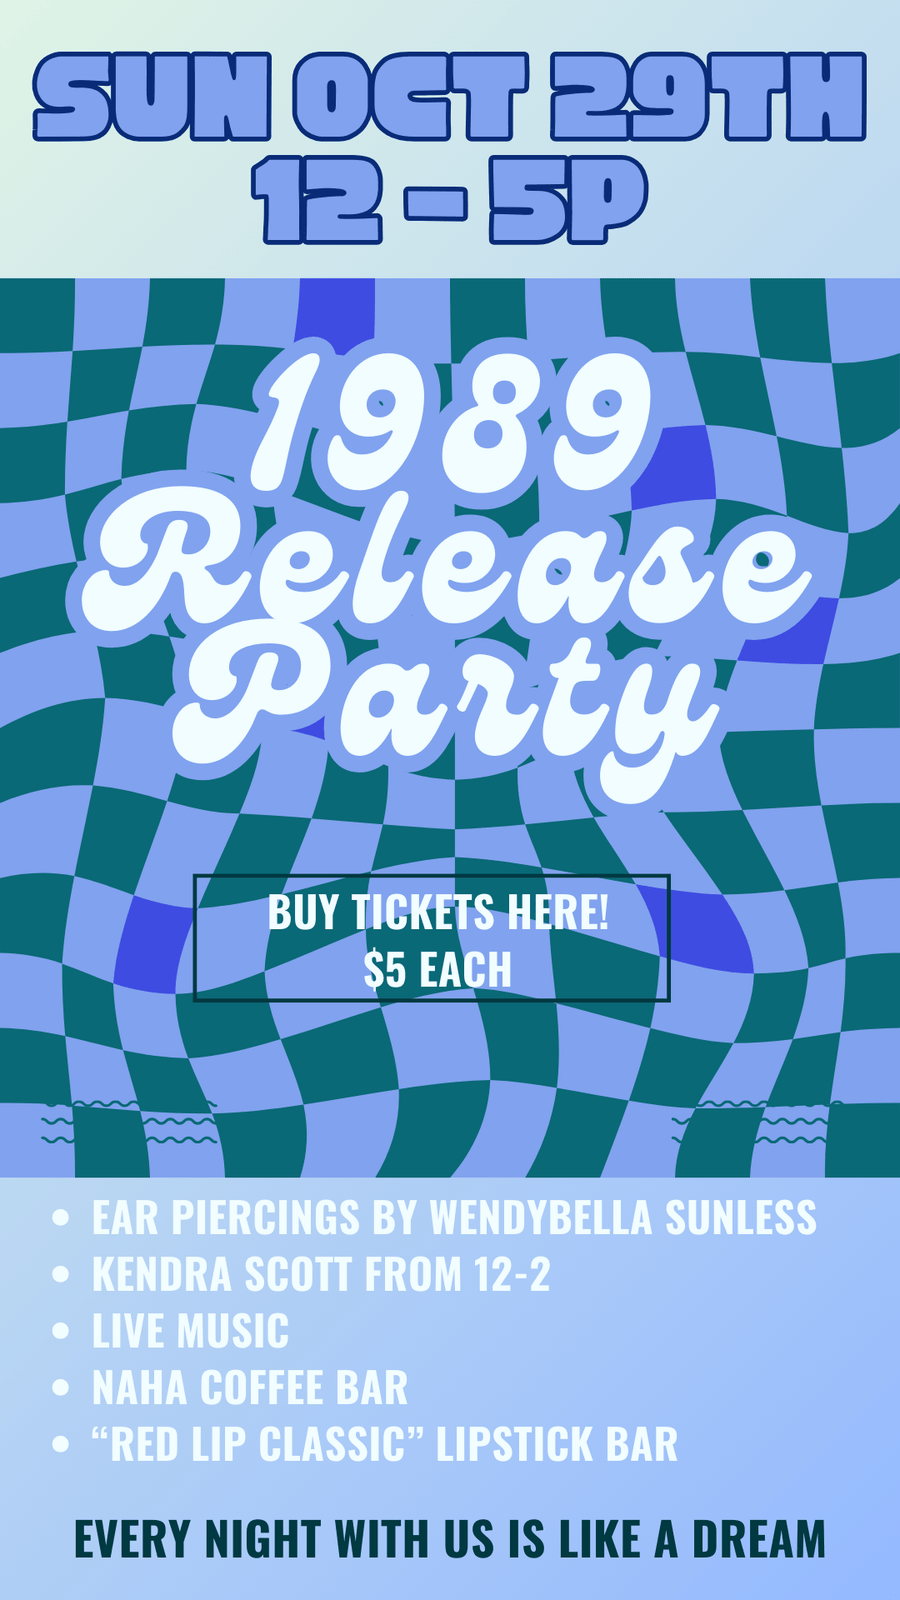 1989 Release Party Ticket